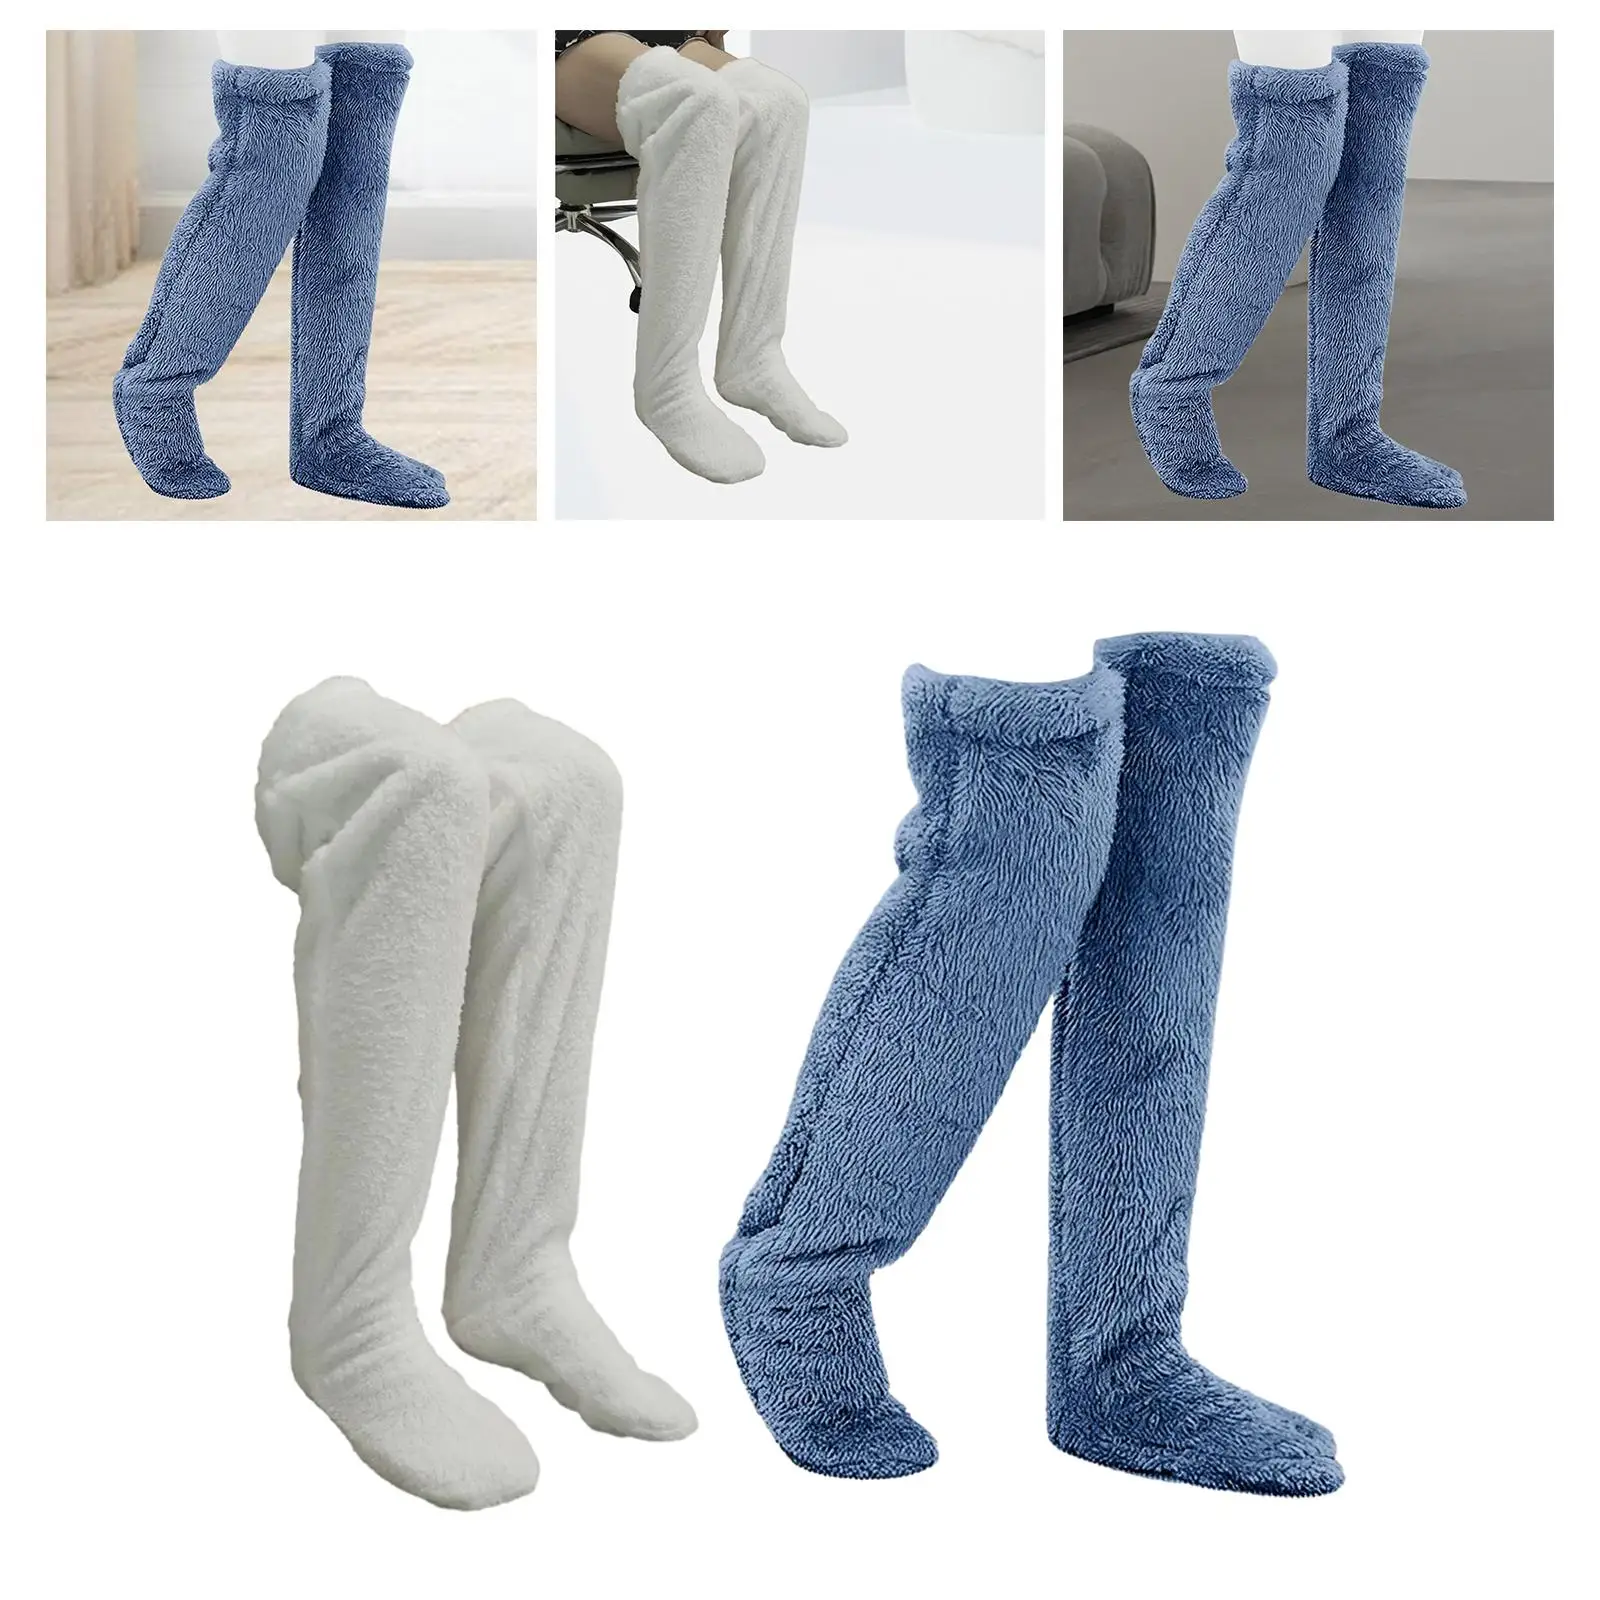 Plush Leg Warmers Long Boot Stockings Protector Knee Warm Thick Soft Costume Thigh High Socks Slipper Stockings for Living Room